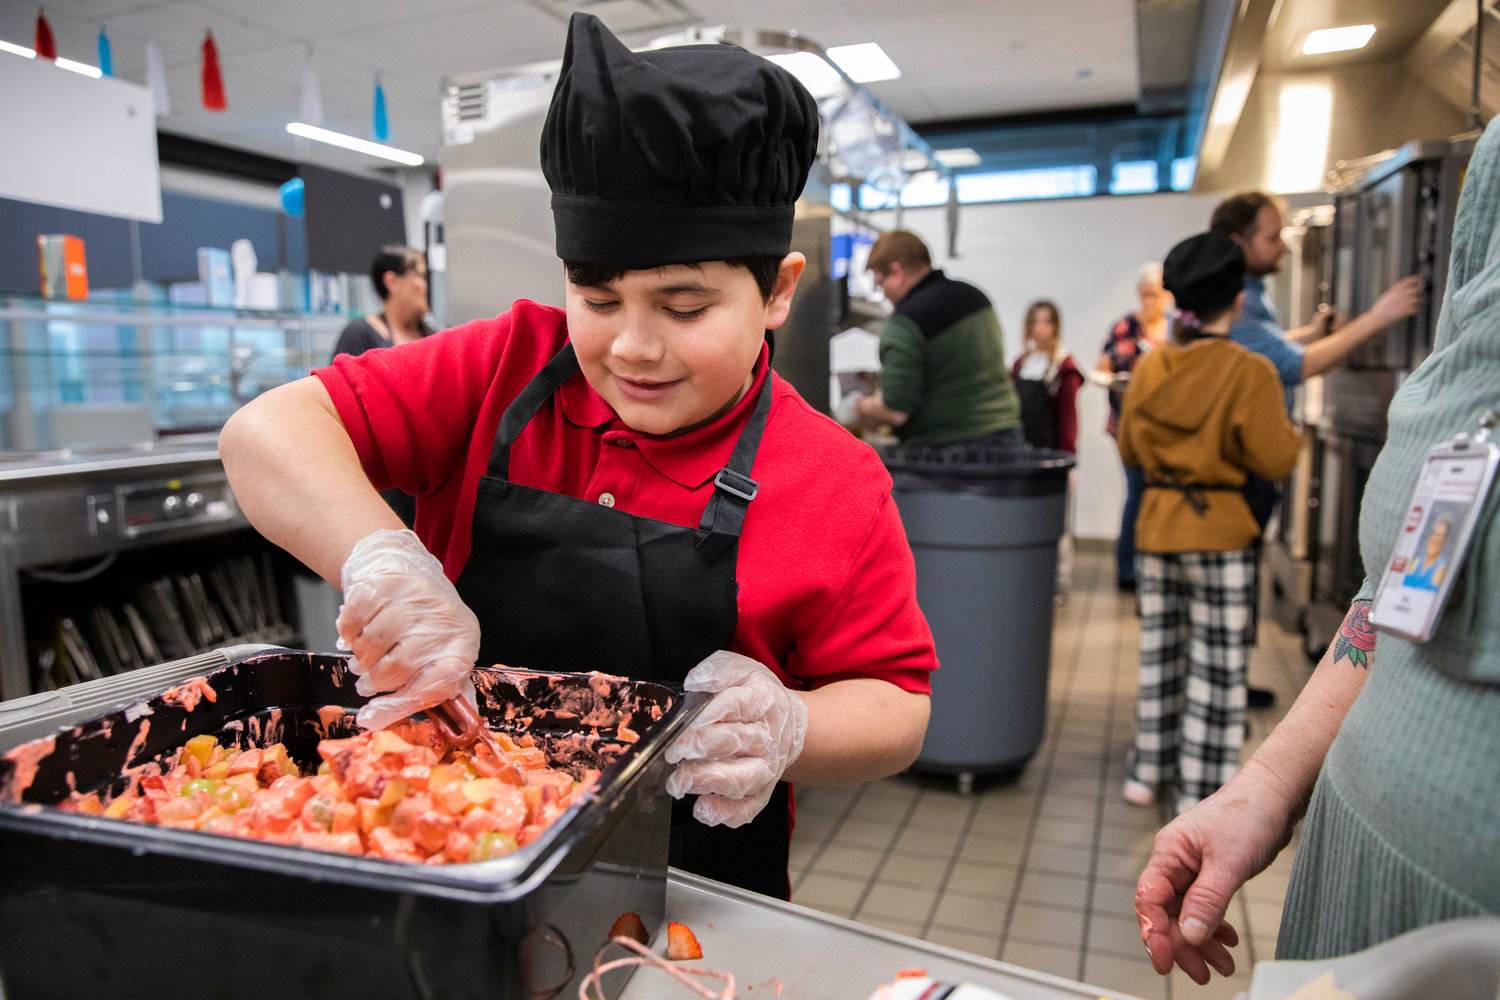 CJ Delarosa, 11, prepares a fruit salad during the Future Chefs National Challenge at Orin Smith Elementary in Chehalis on Thursday.